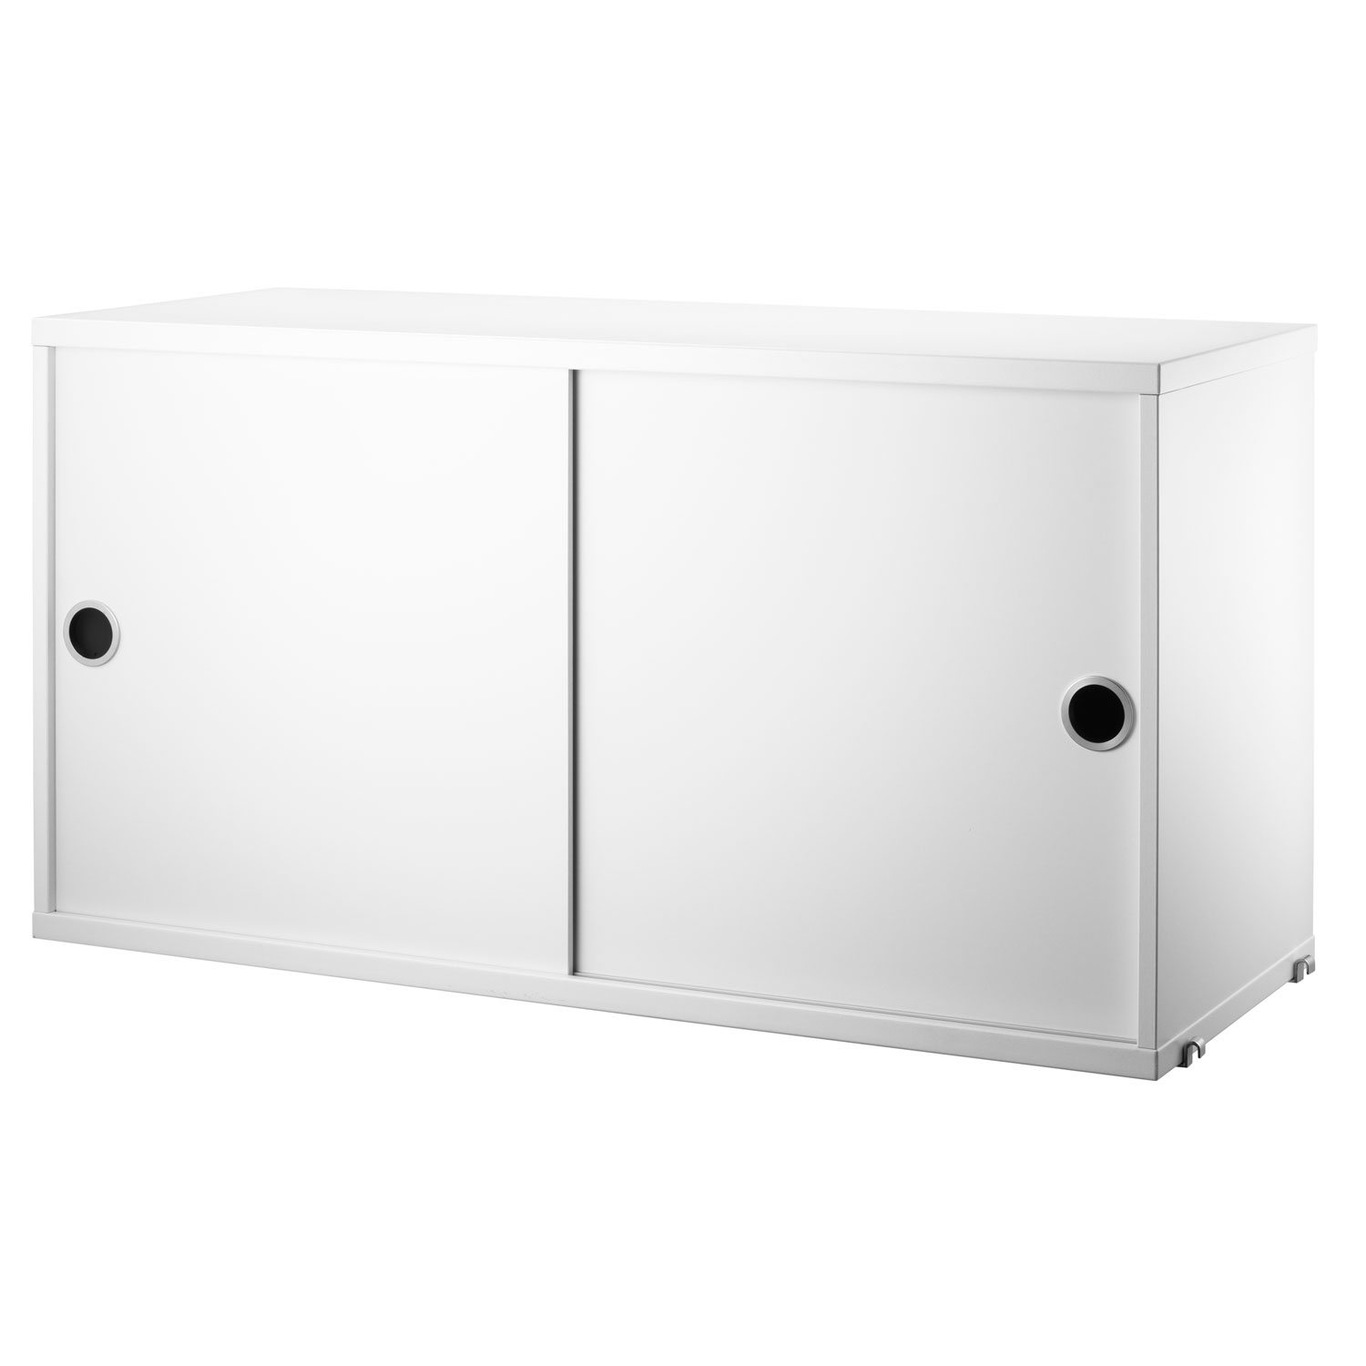 String Cabinet With Sliding Doors 30x78 cm, White